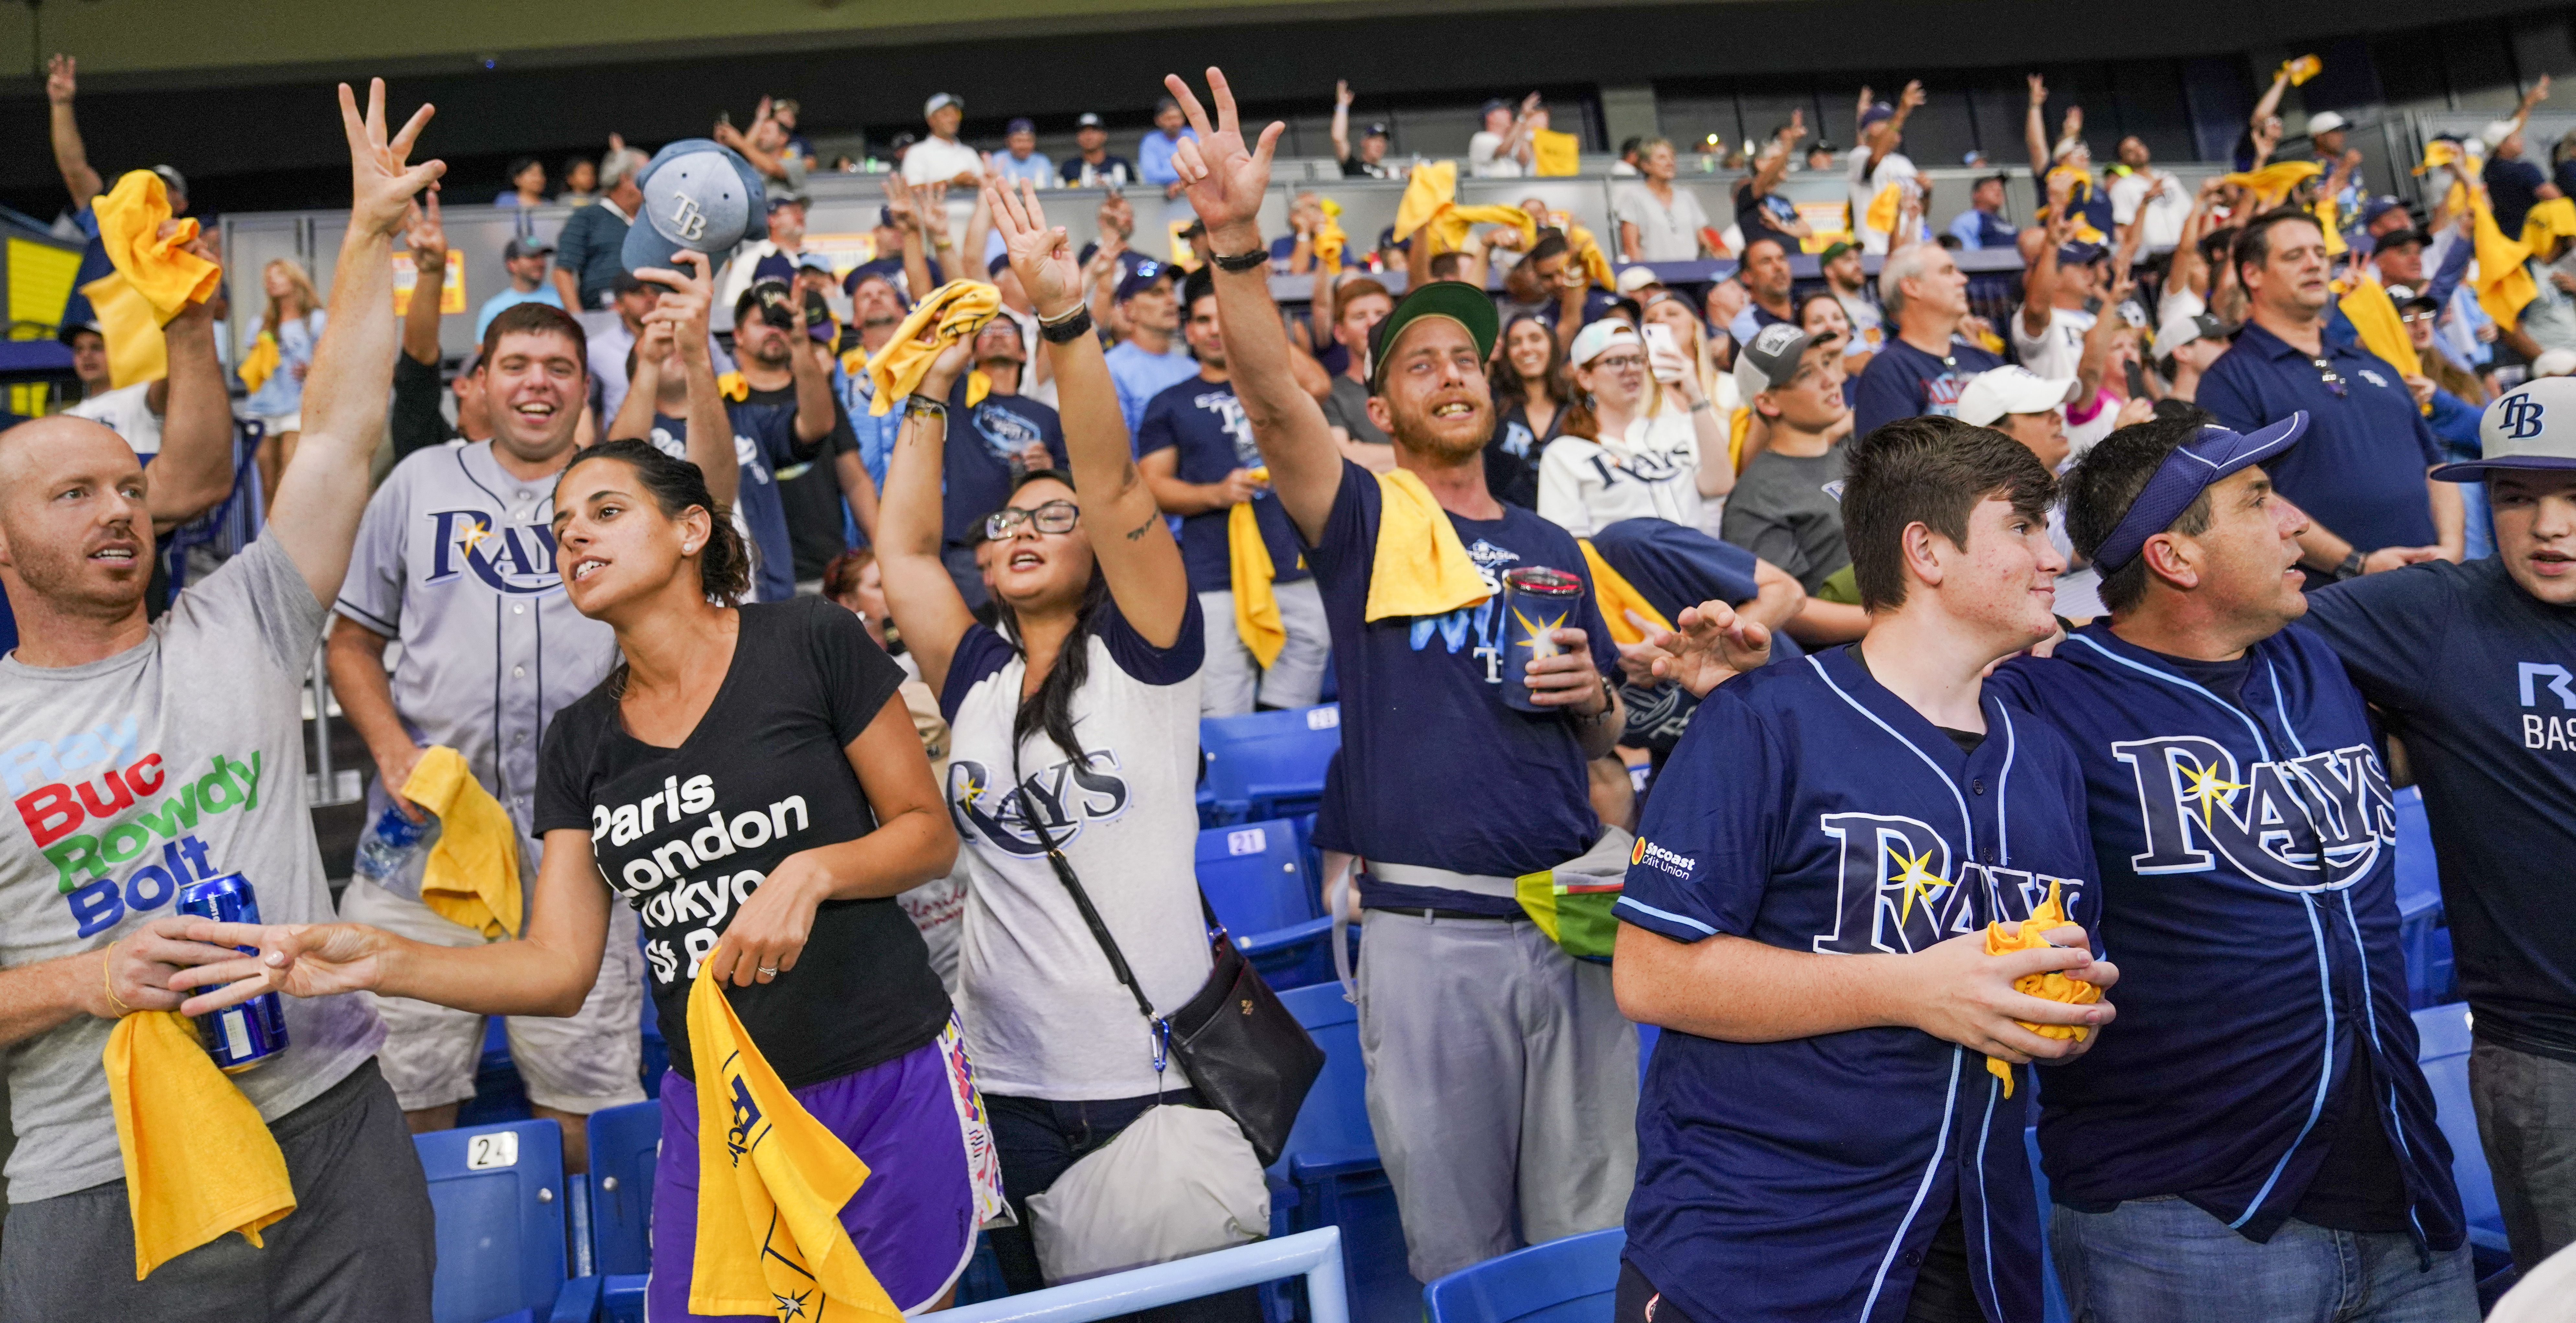 It's Official: The Rays are staying in St. Pete